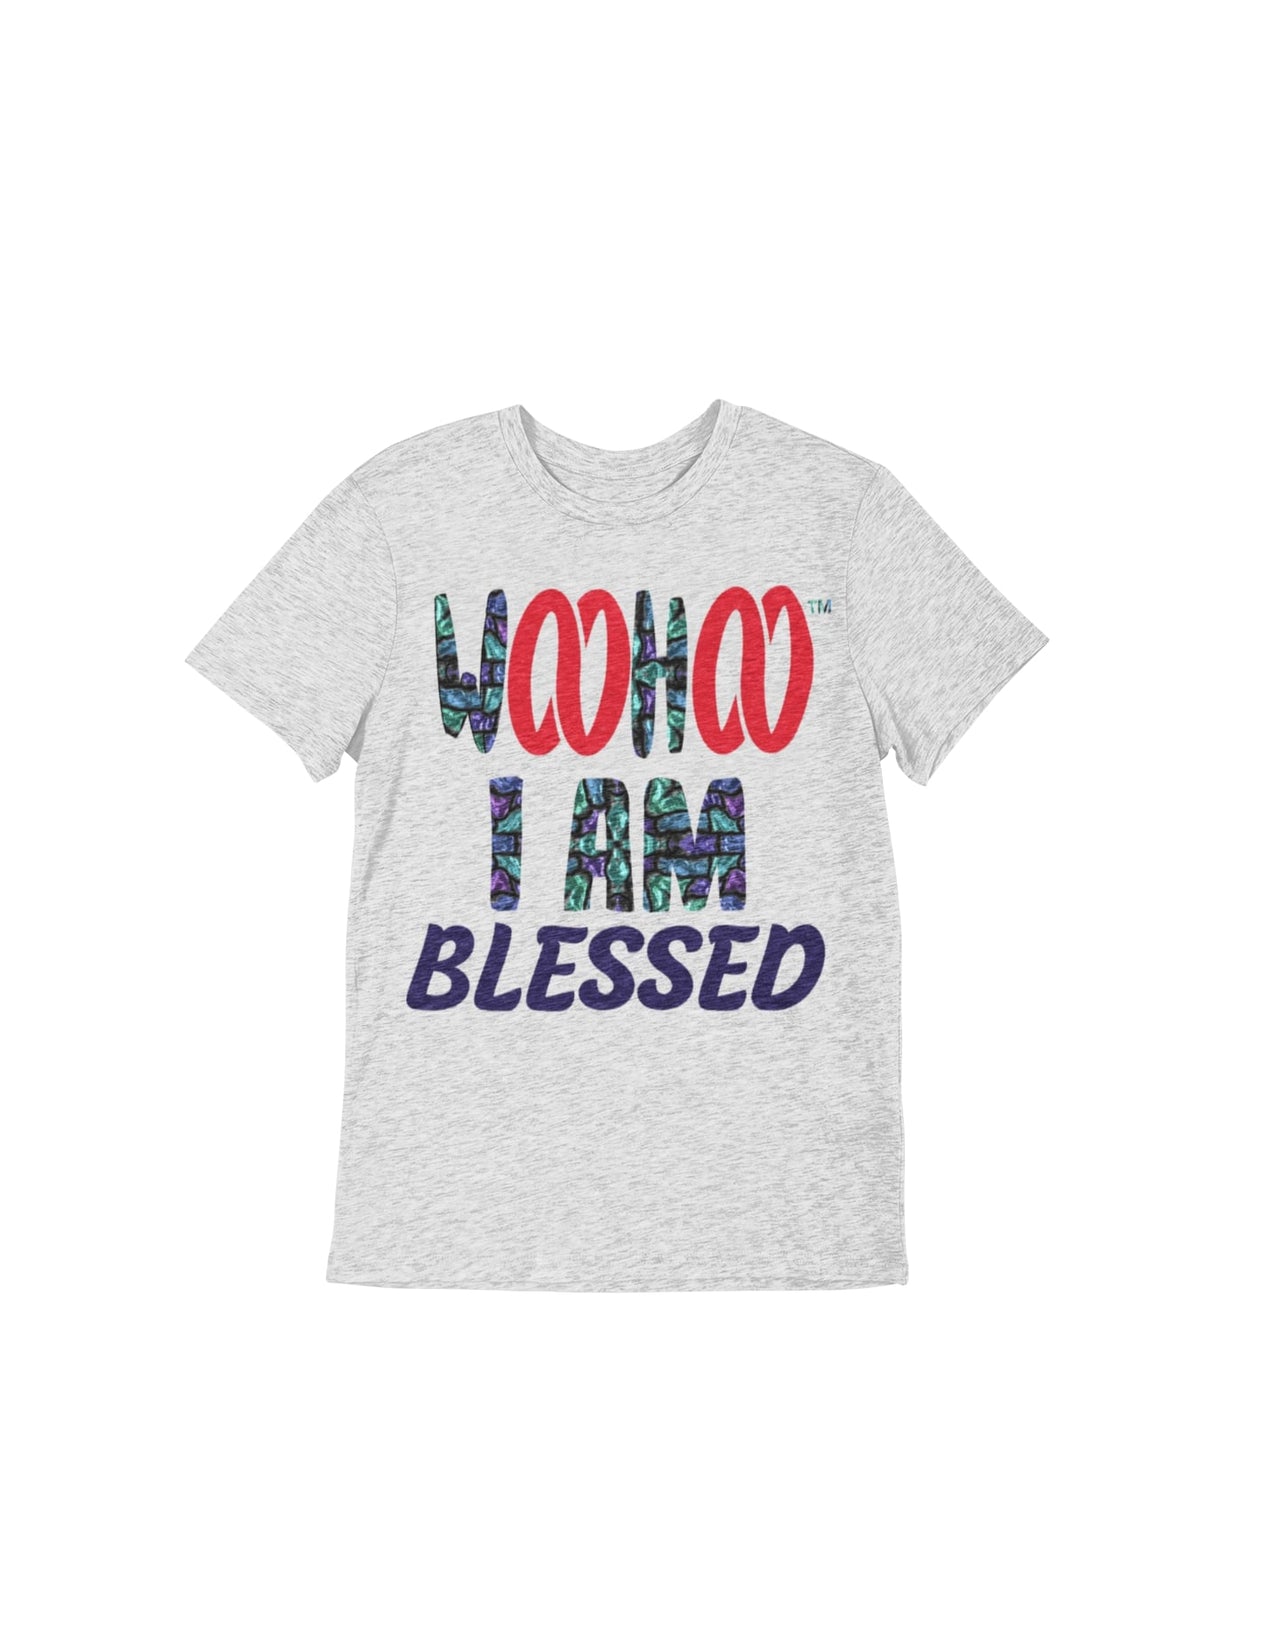 A heather gray unisex t-shirt designed by WooHoo Apparel,  The t-shirt features the text 'woohoo, I am Blessed' in stain glass cool-looking fonts, with the double 'oo' in 'woohoo' represented by a red double infinity symbol